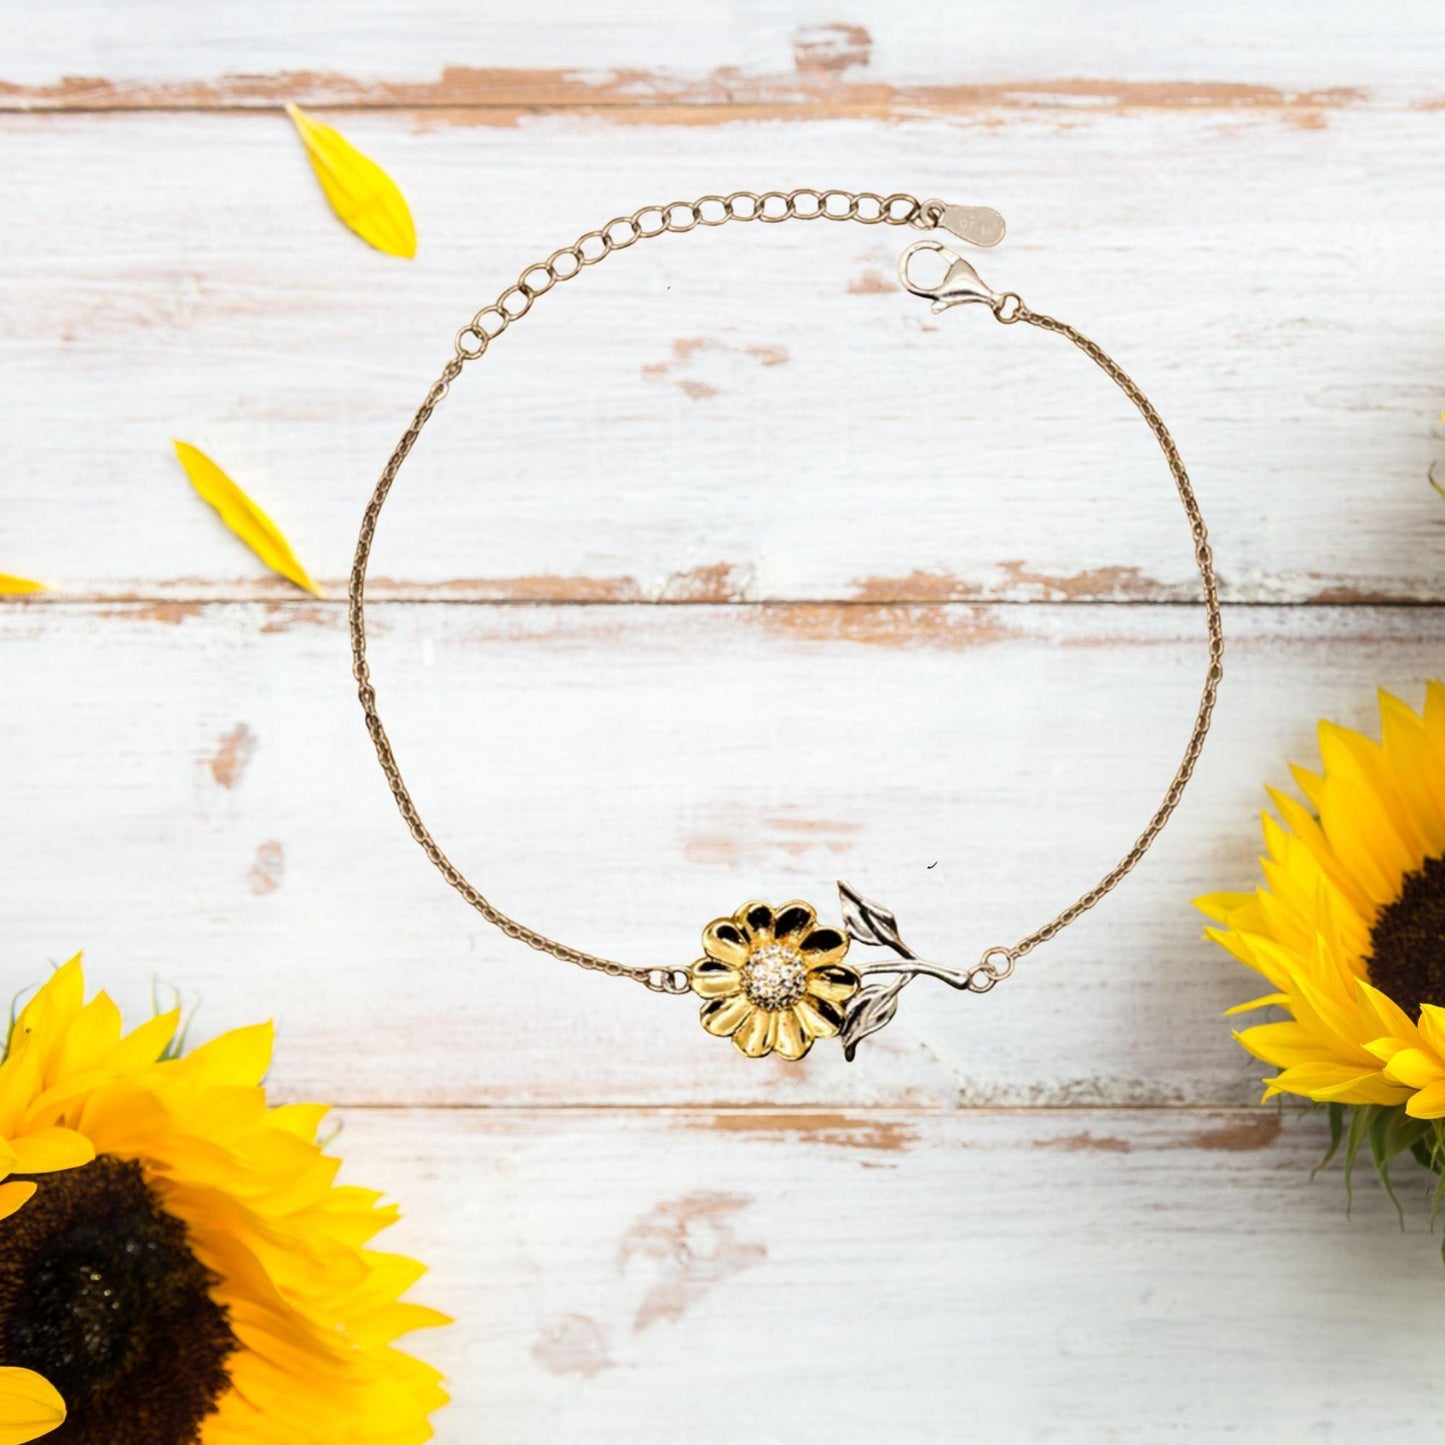 Parole Officer Sunflower Bracelet - Thanks for being who you are - Birthday Christmas Jewelry Gifts Coworkers Colleague Boss - Mallard Moon Gift Shop